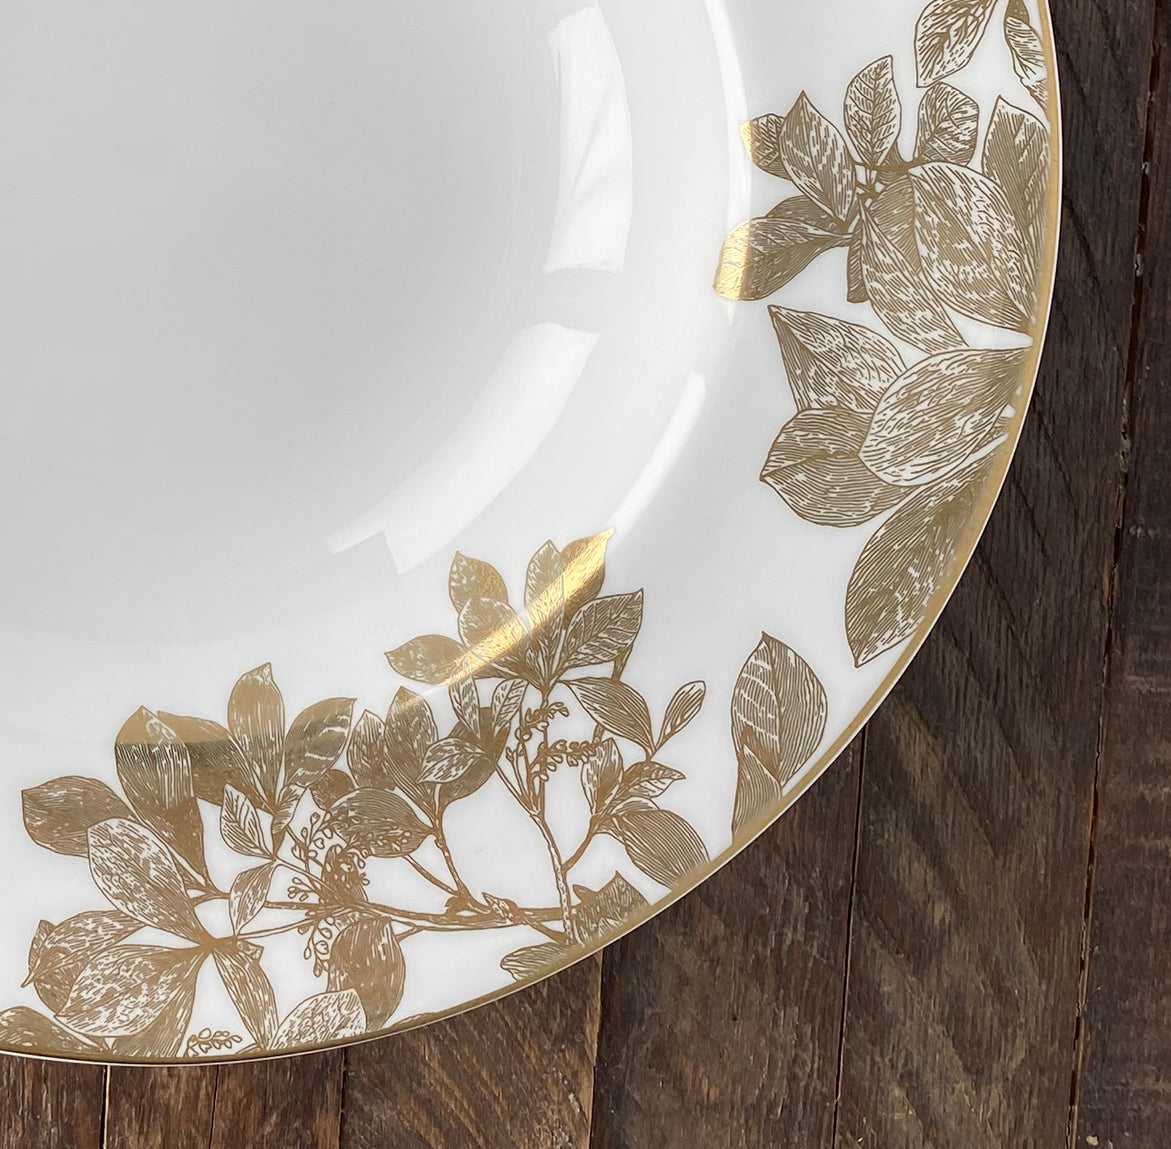 A close up photo of the bone china Arbor Gold Rimmed Soup Bowl by Caskata shows off the intricate branches of the design.